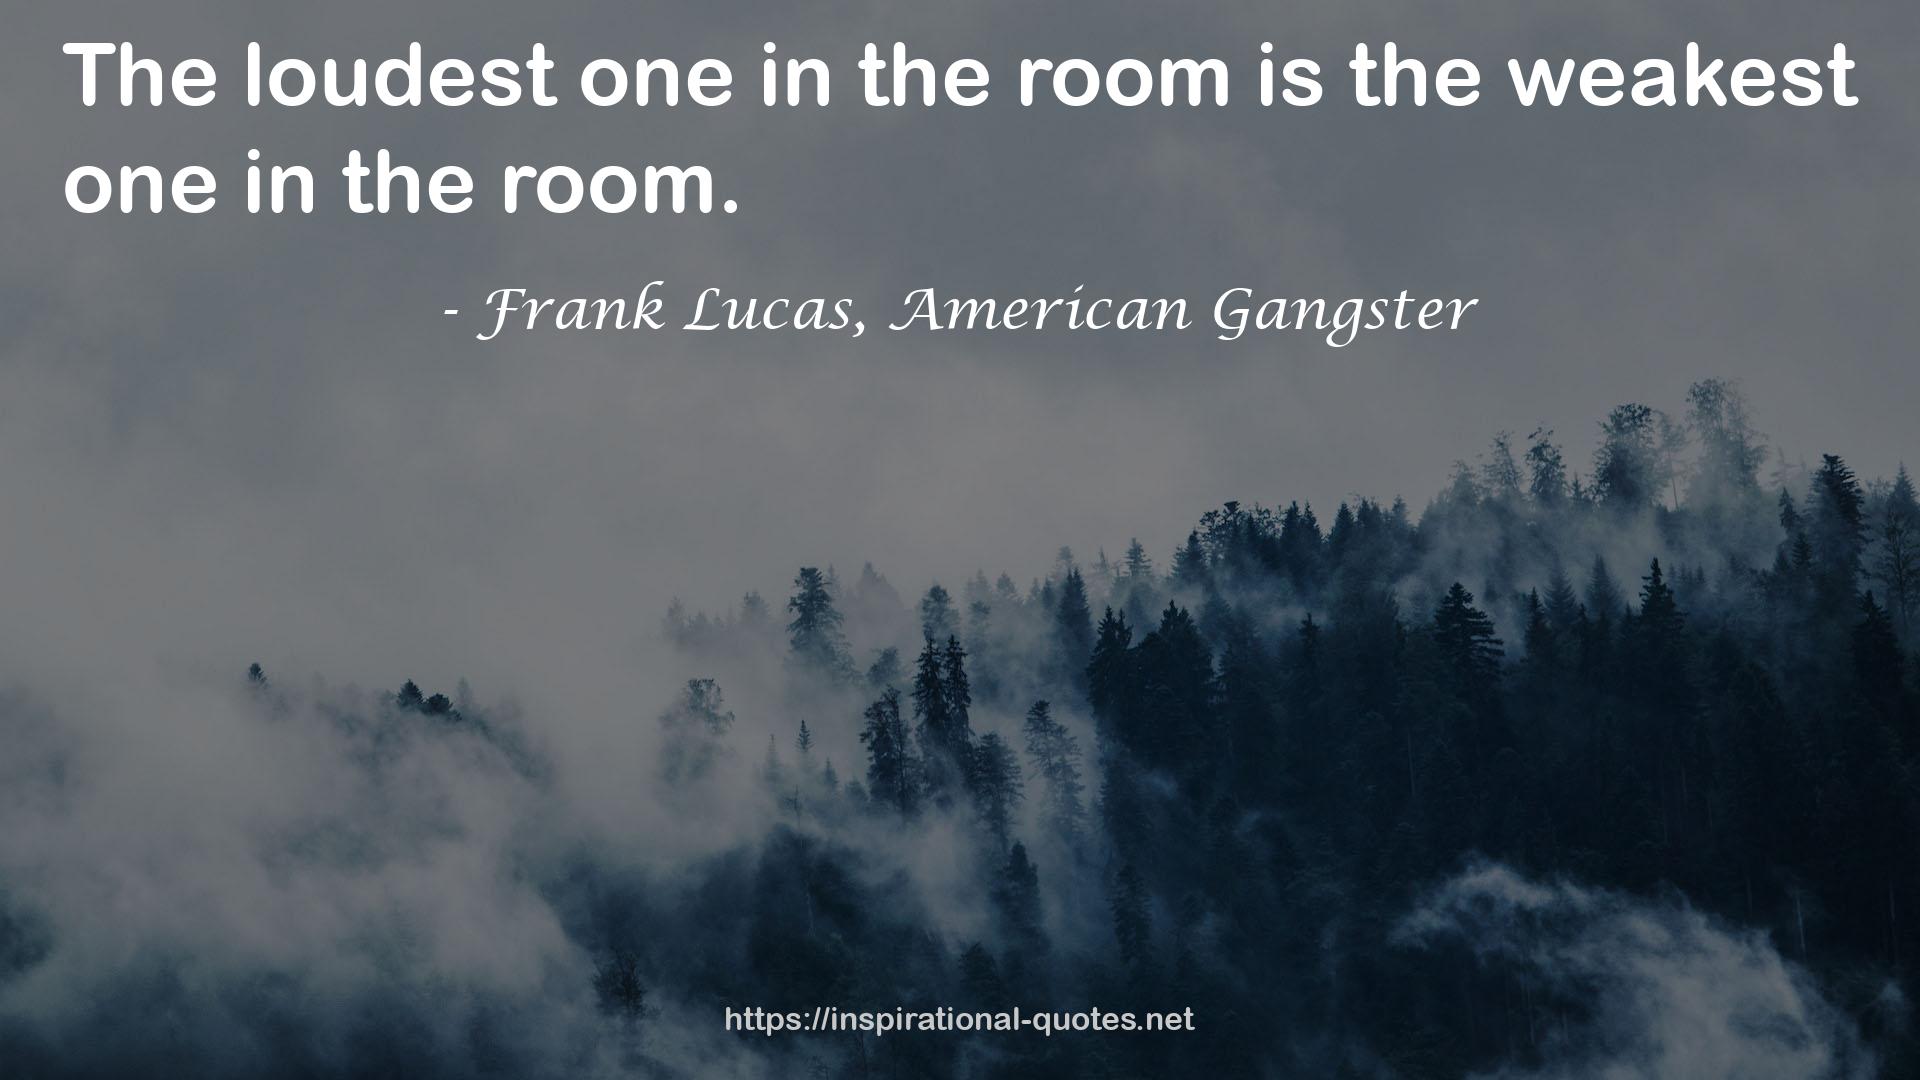 Frank Lucas, American Gangster QUOTES